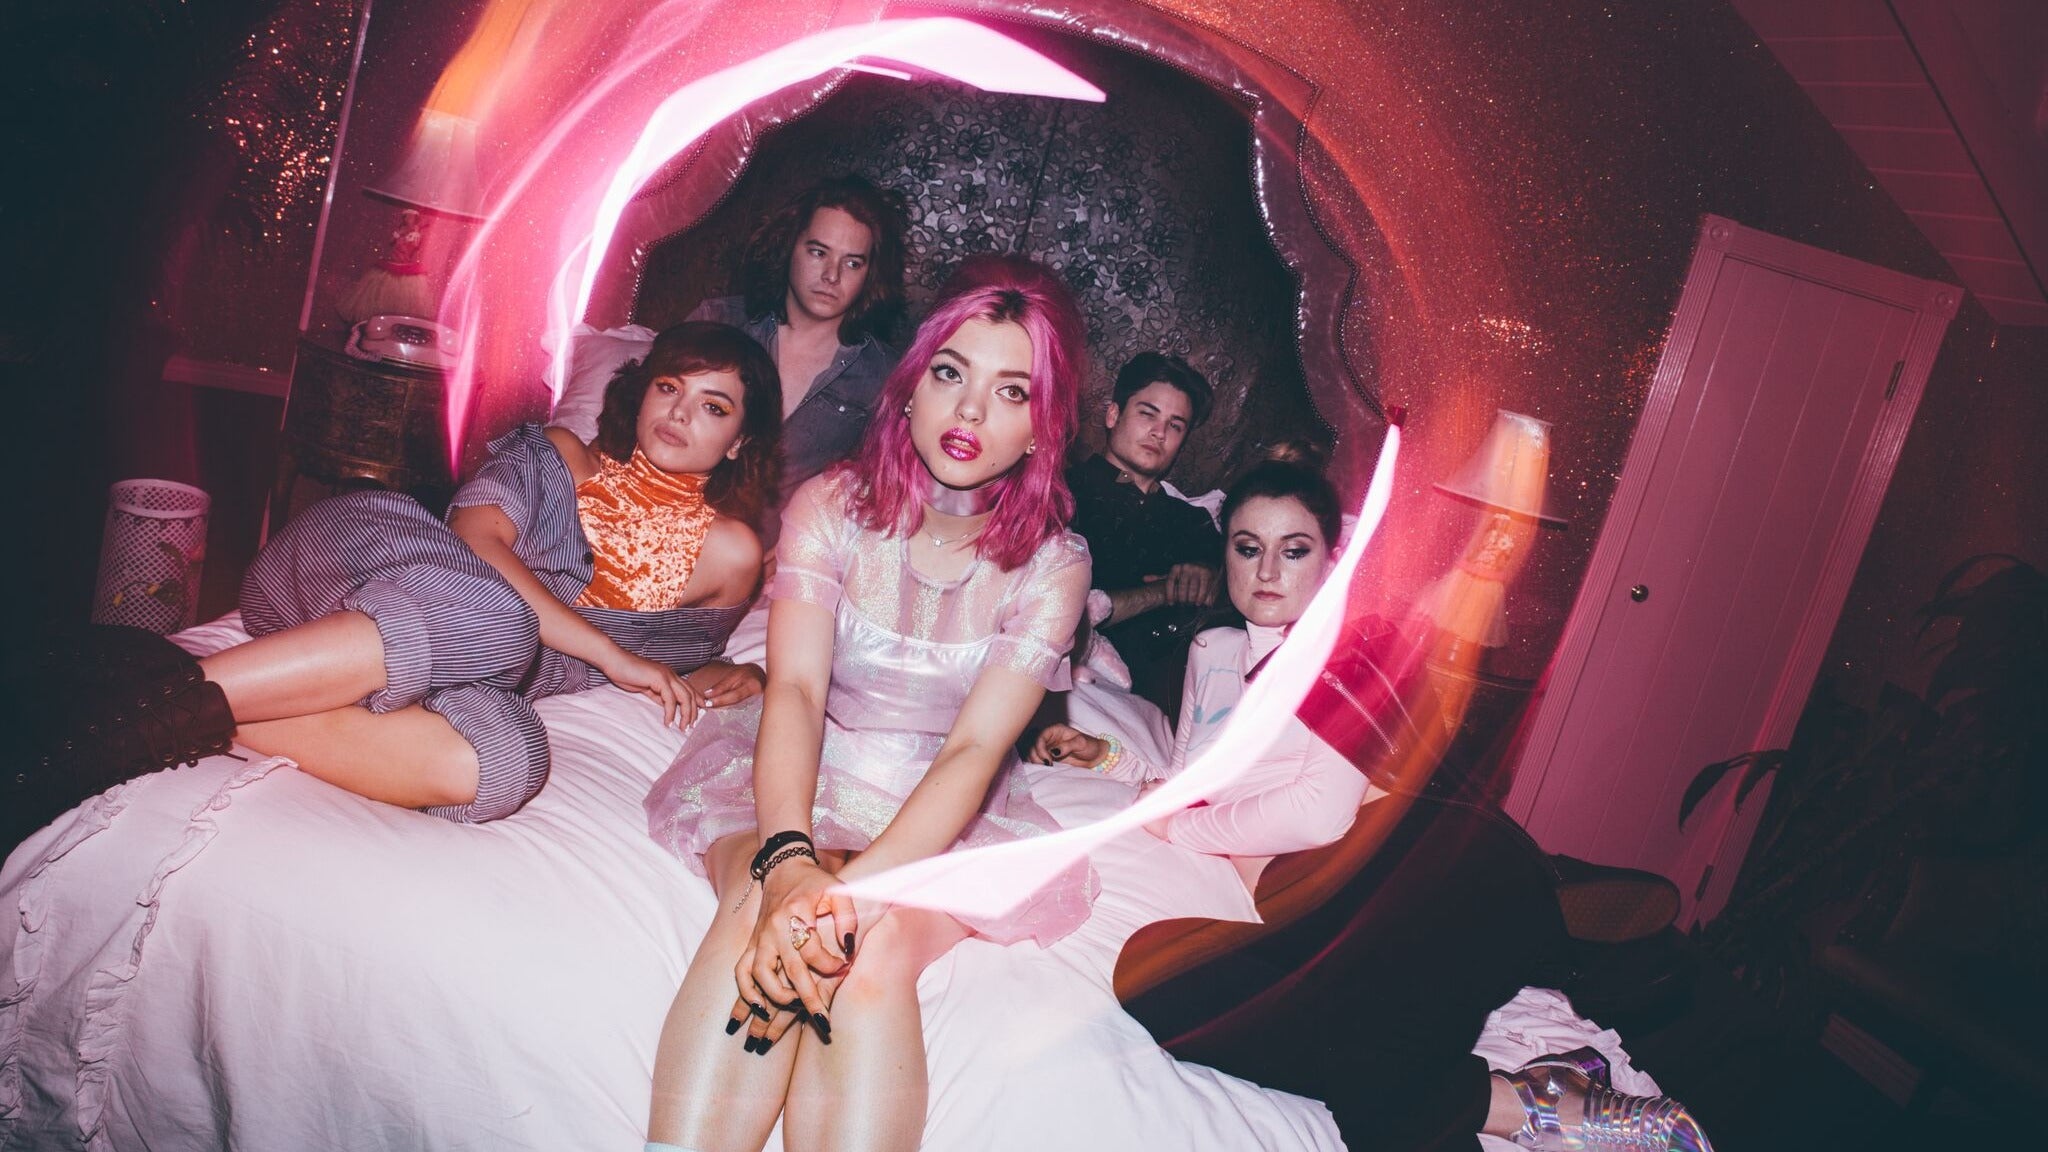 Hey Violet presale password for early tickets in San Diego